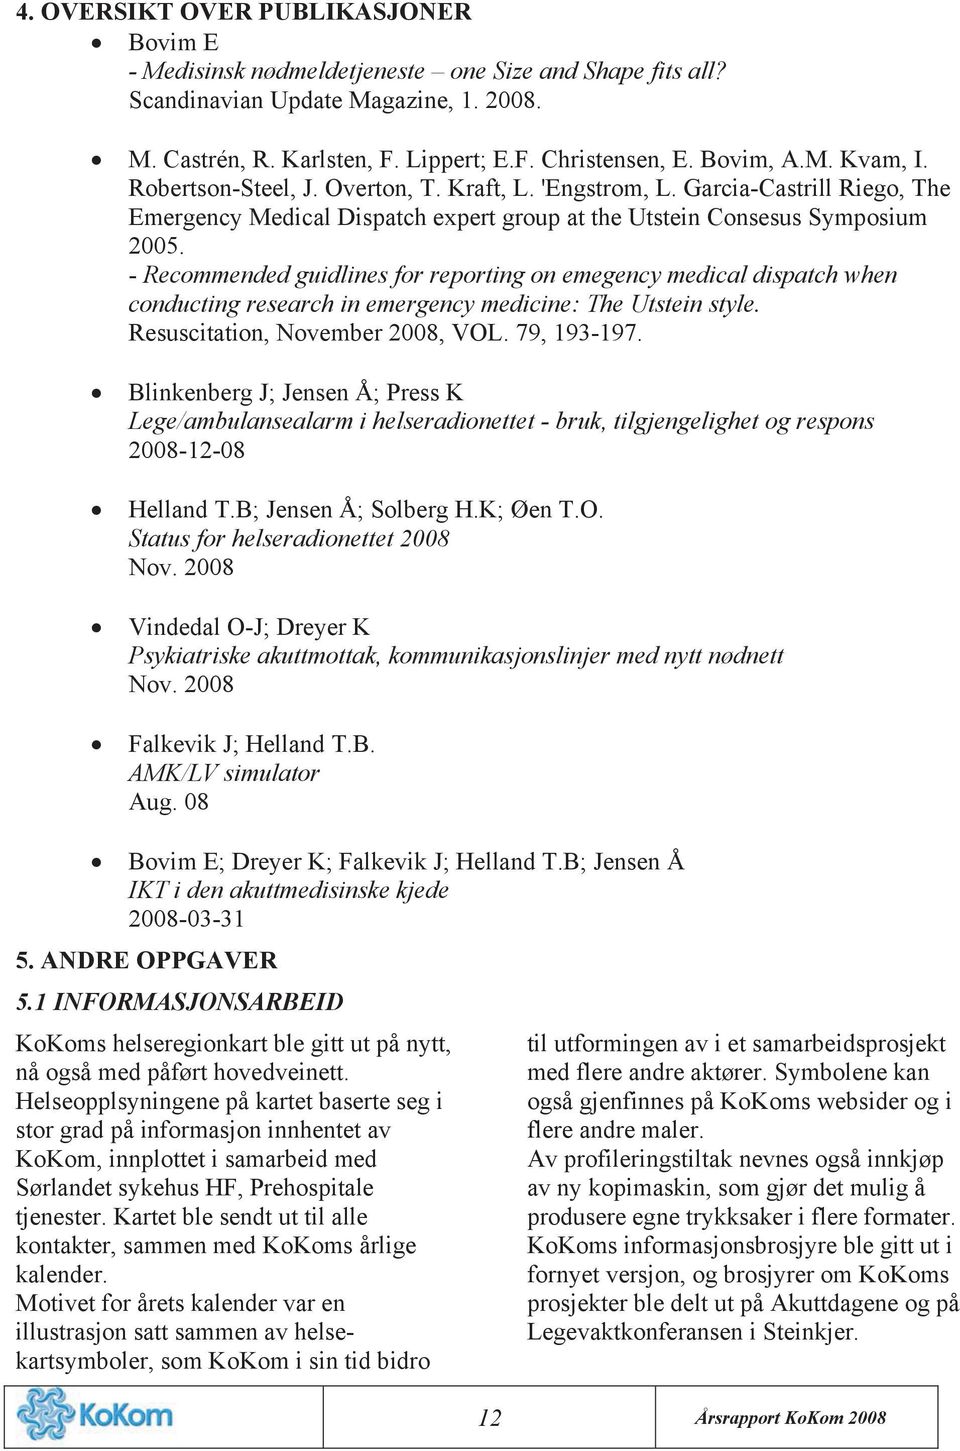 - Recommended guidlines for reporting on emegency medical dispatch when conducting research in emergency medicine: The Utstein style. Resuscitation, November 2008, VOL. 79, 193-197.